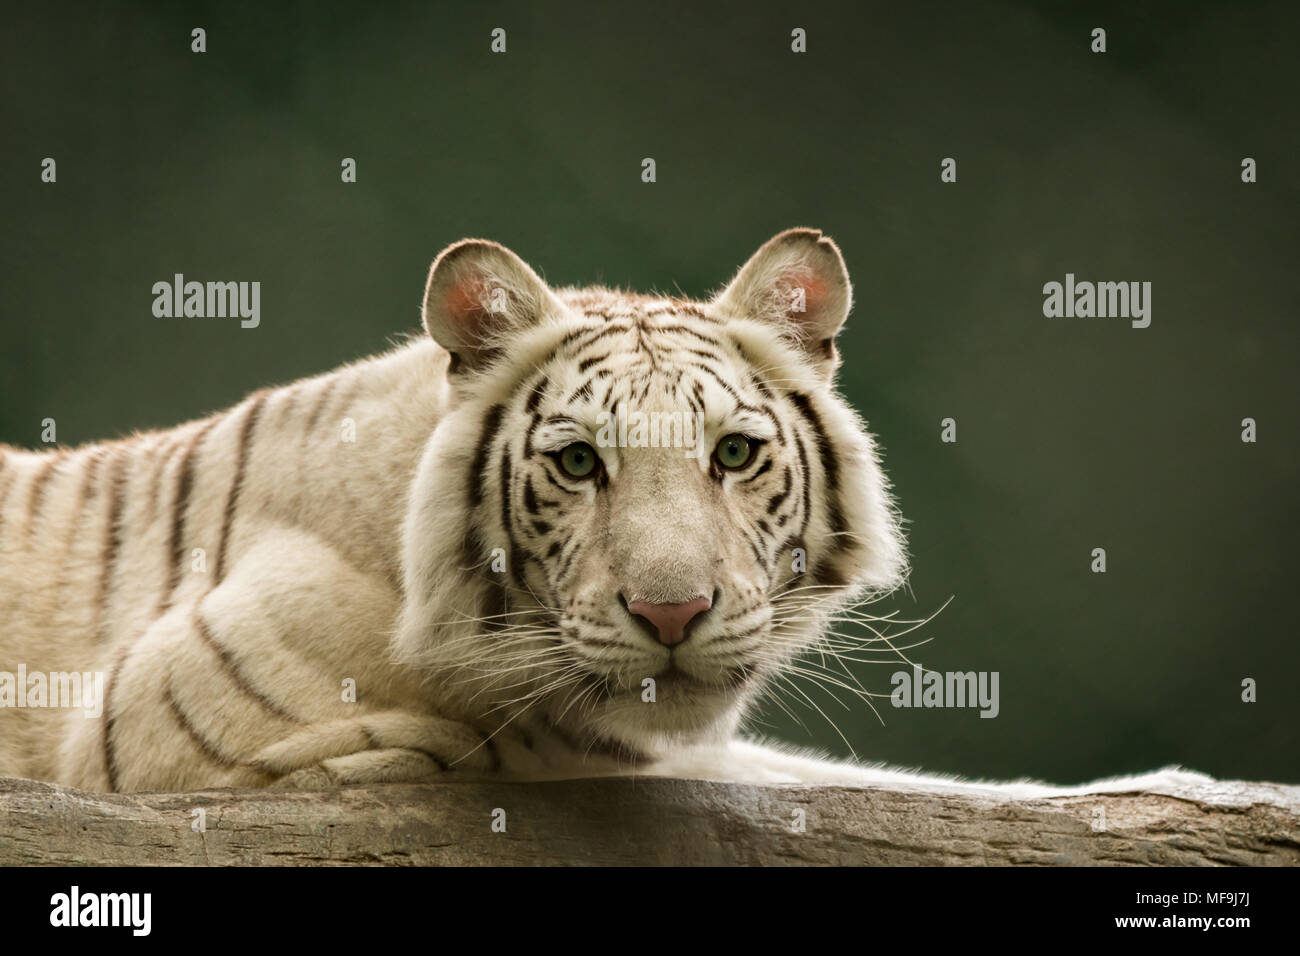 It was unnerving to be stared down by a White TIger while photographing it at Mirage Hotel and Casino's Seigfried and Roy Secret Garden in Las Vegas. Stock Photo